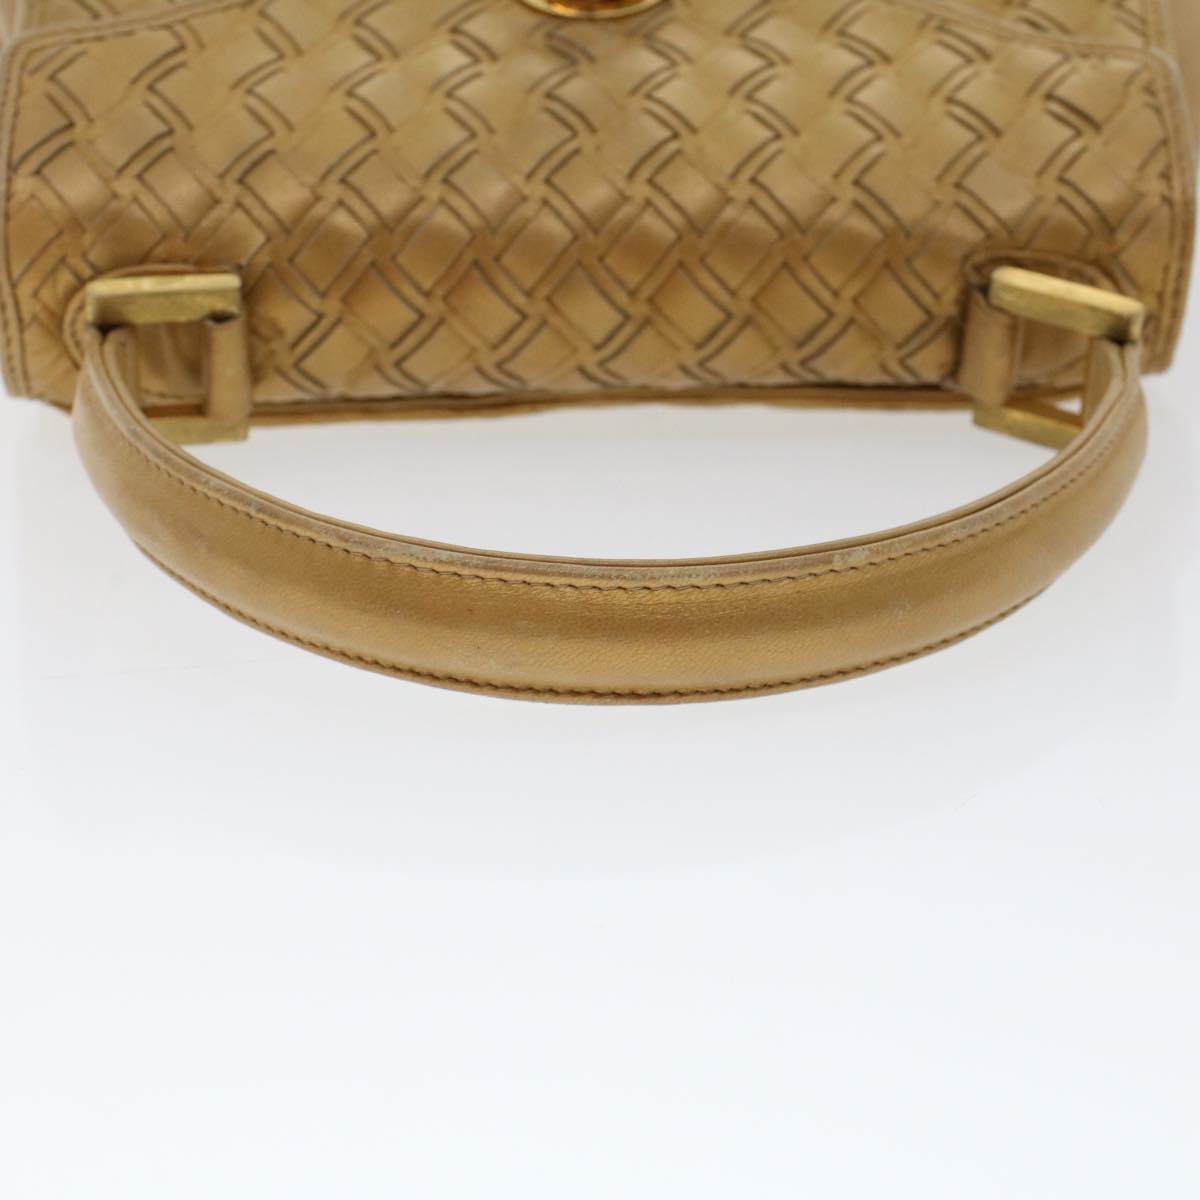 BALLY Hand Bag Leather 2way Gold Tone Auth yk7647